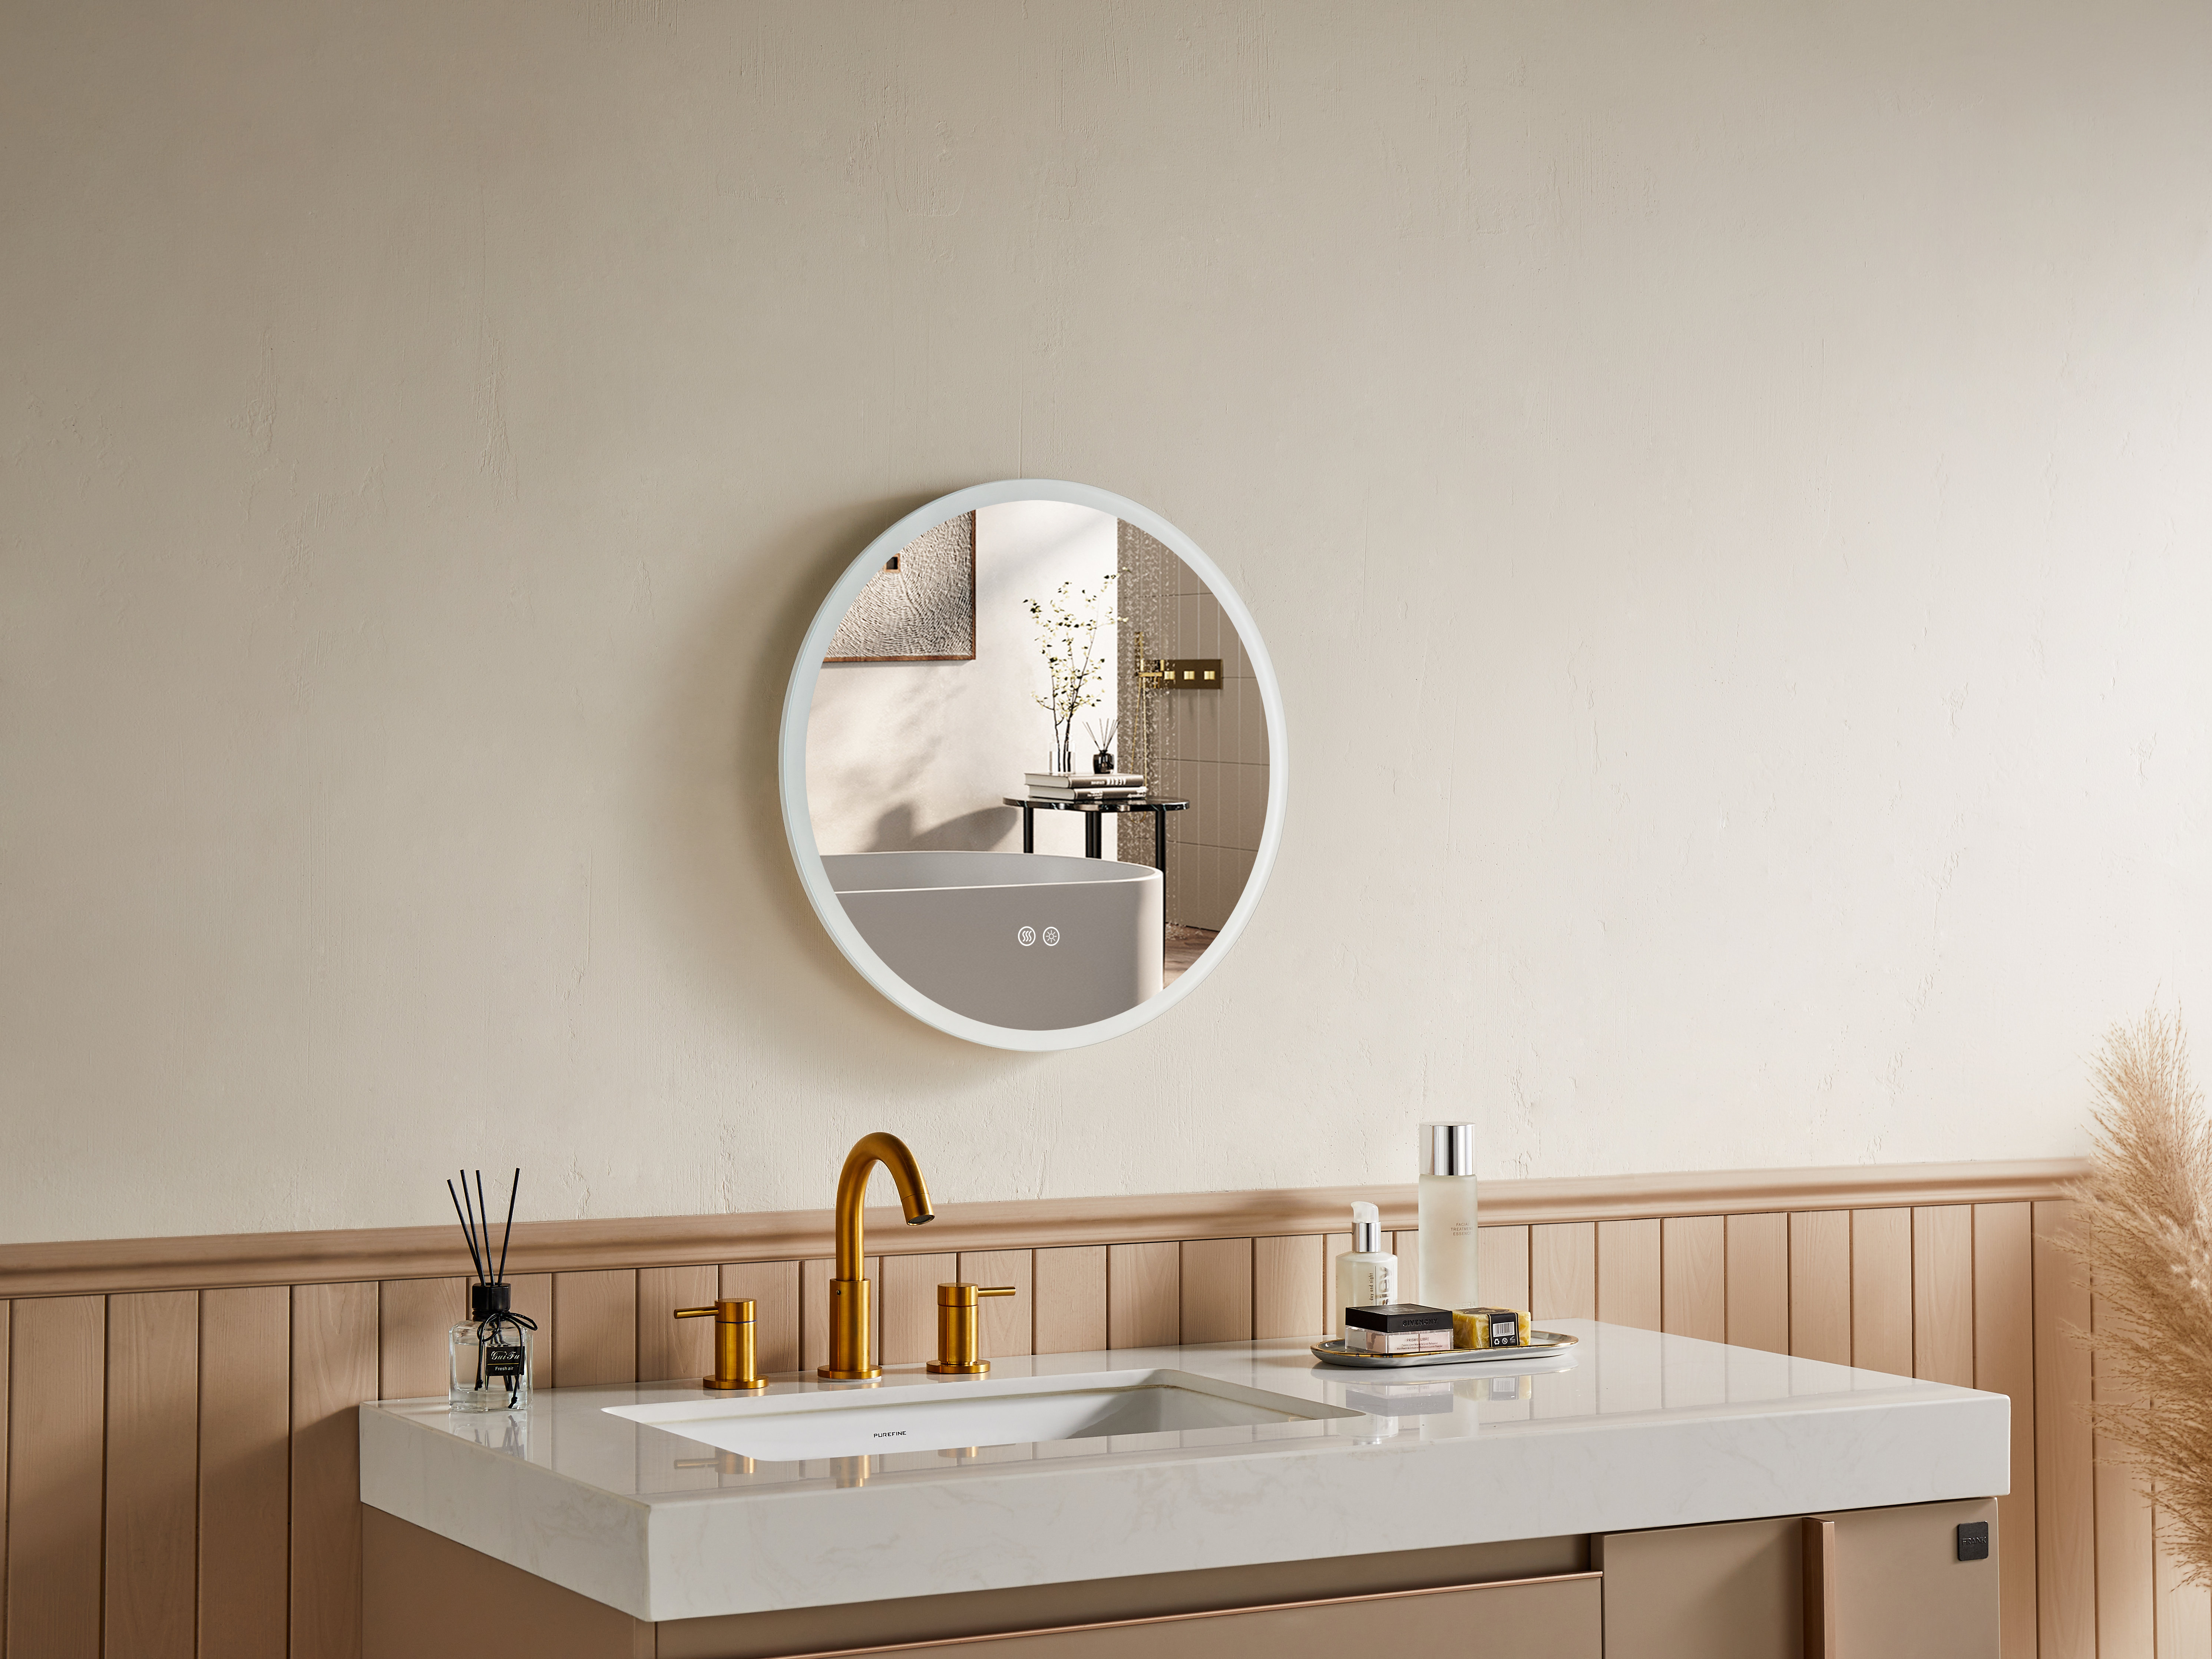 Buy Round Bathroom Mirror with 3 Colors Lights, LED Mirror for